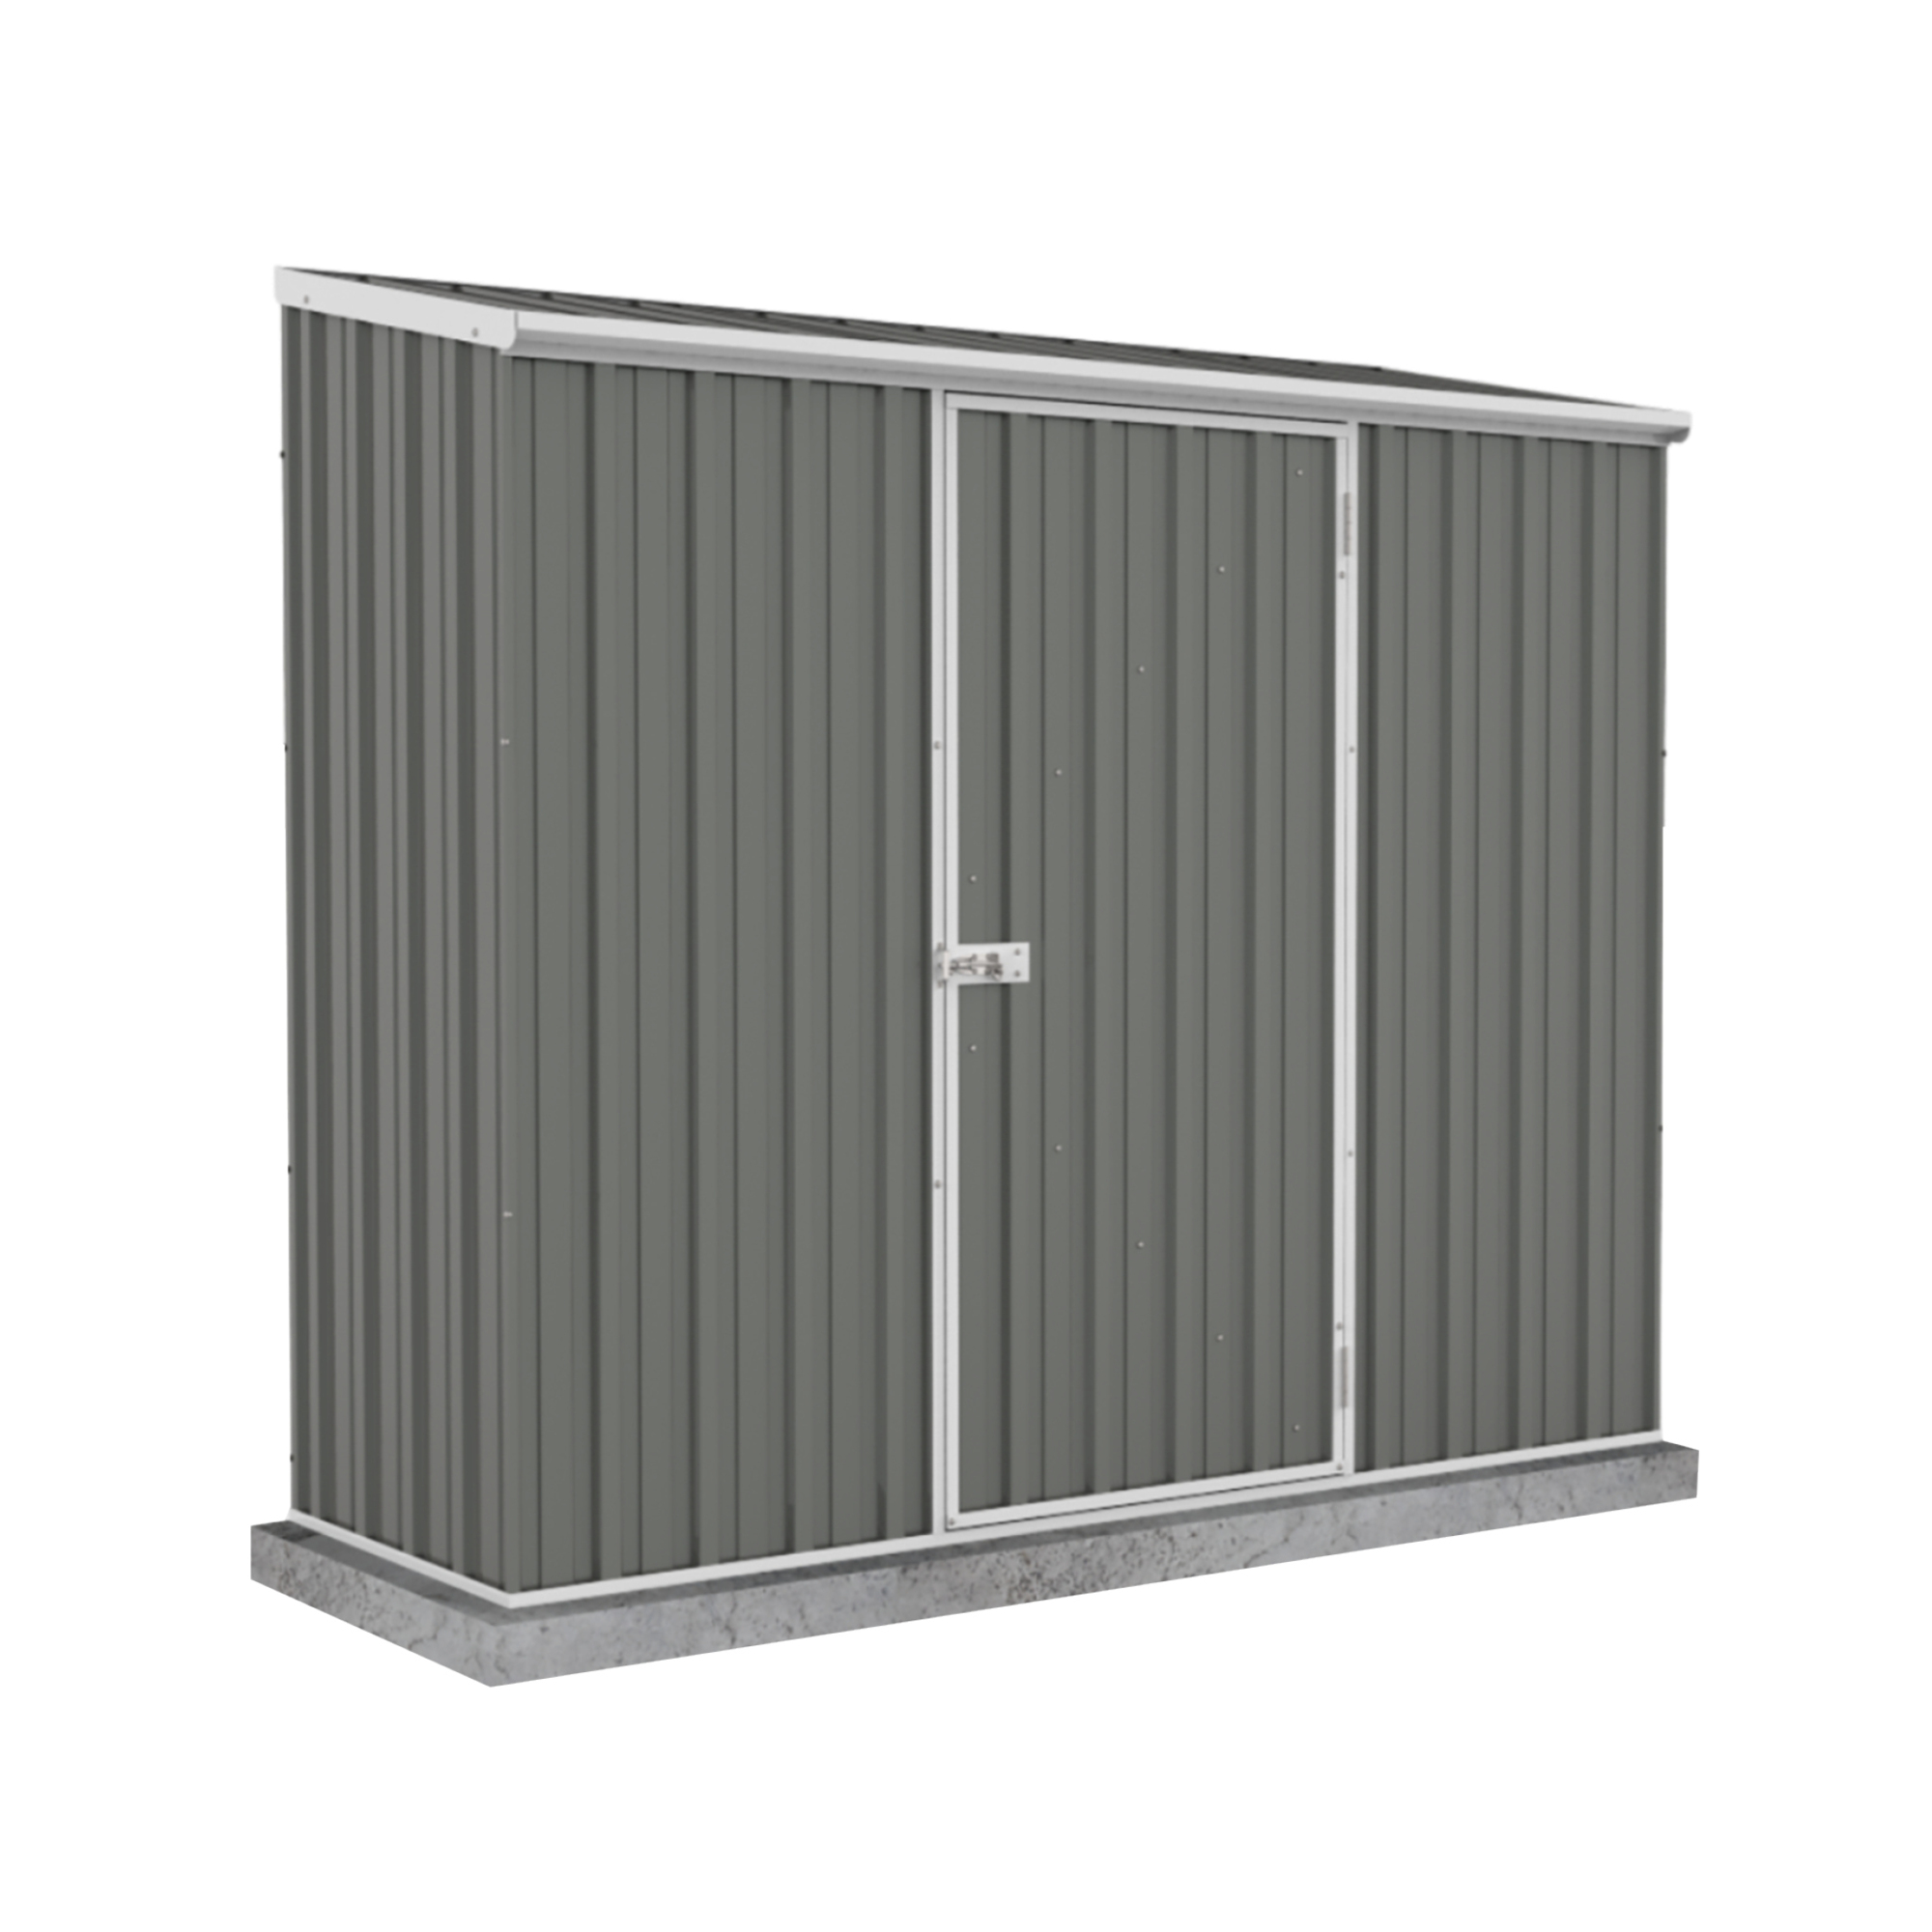 Poly-Tex Inc., 7ft. x 3ft. Space Saver Metal Storage Shed, Length 88.5 ft, Width 30.7086 ft, Model WG23081SK-PTX